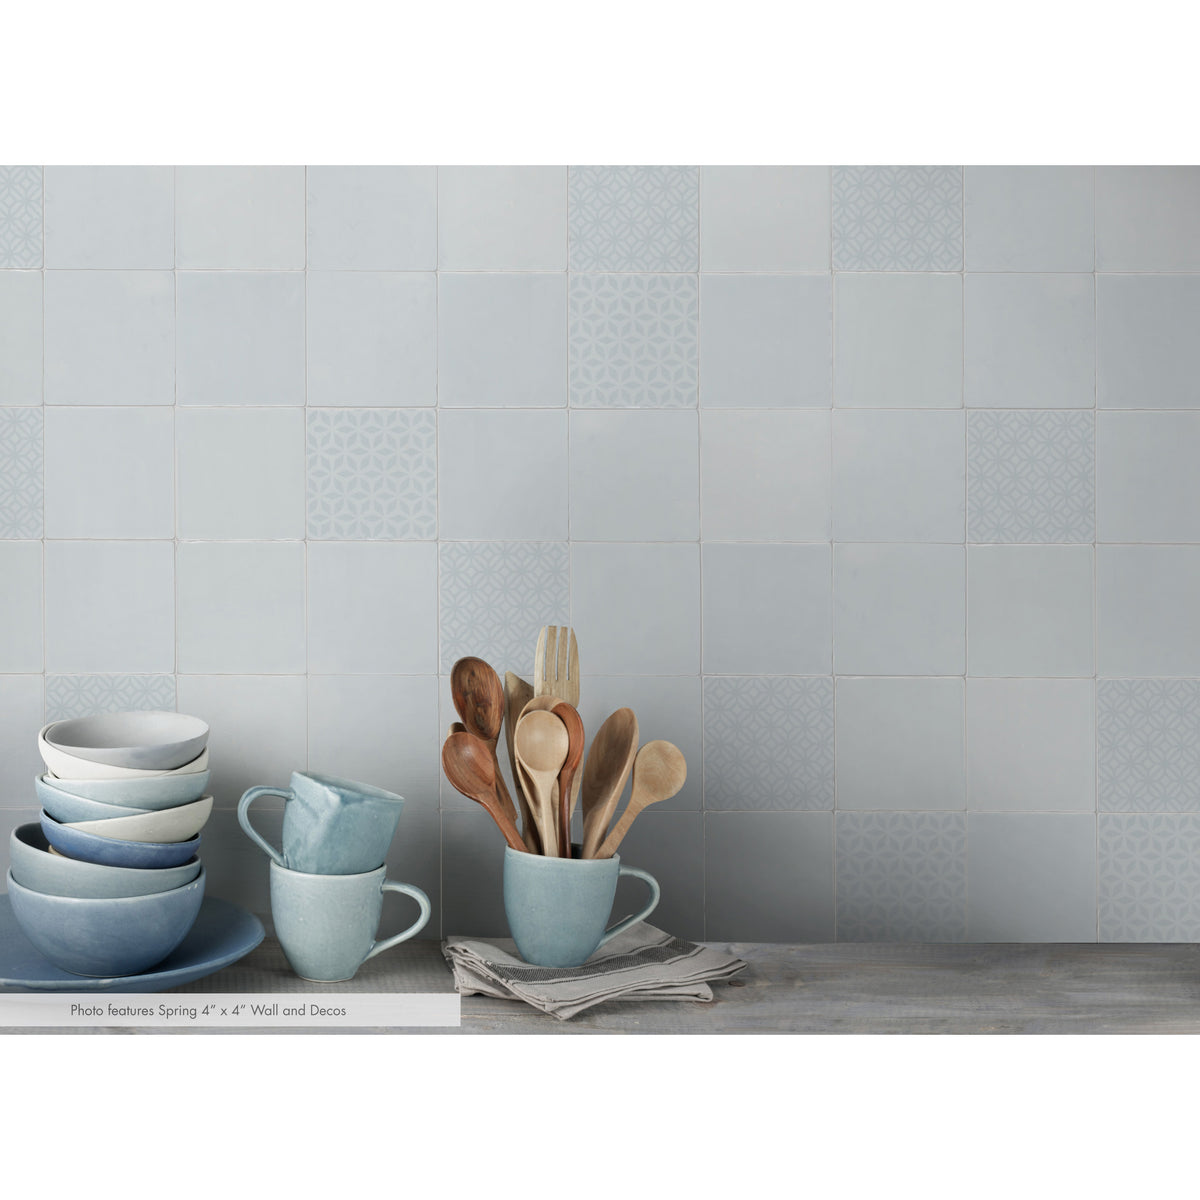 Lungarno - Seasons 4 in. x 4 in. Wall Tile - Spring